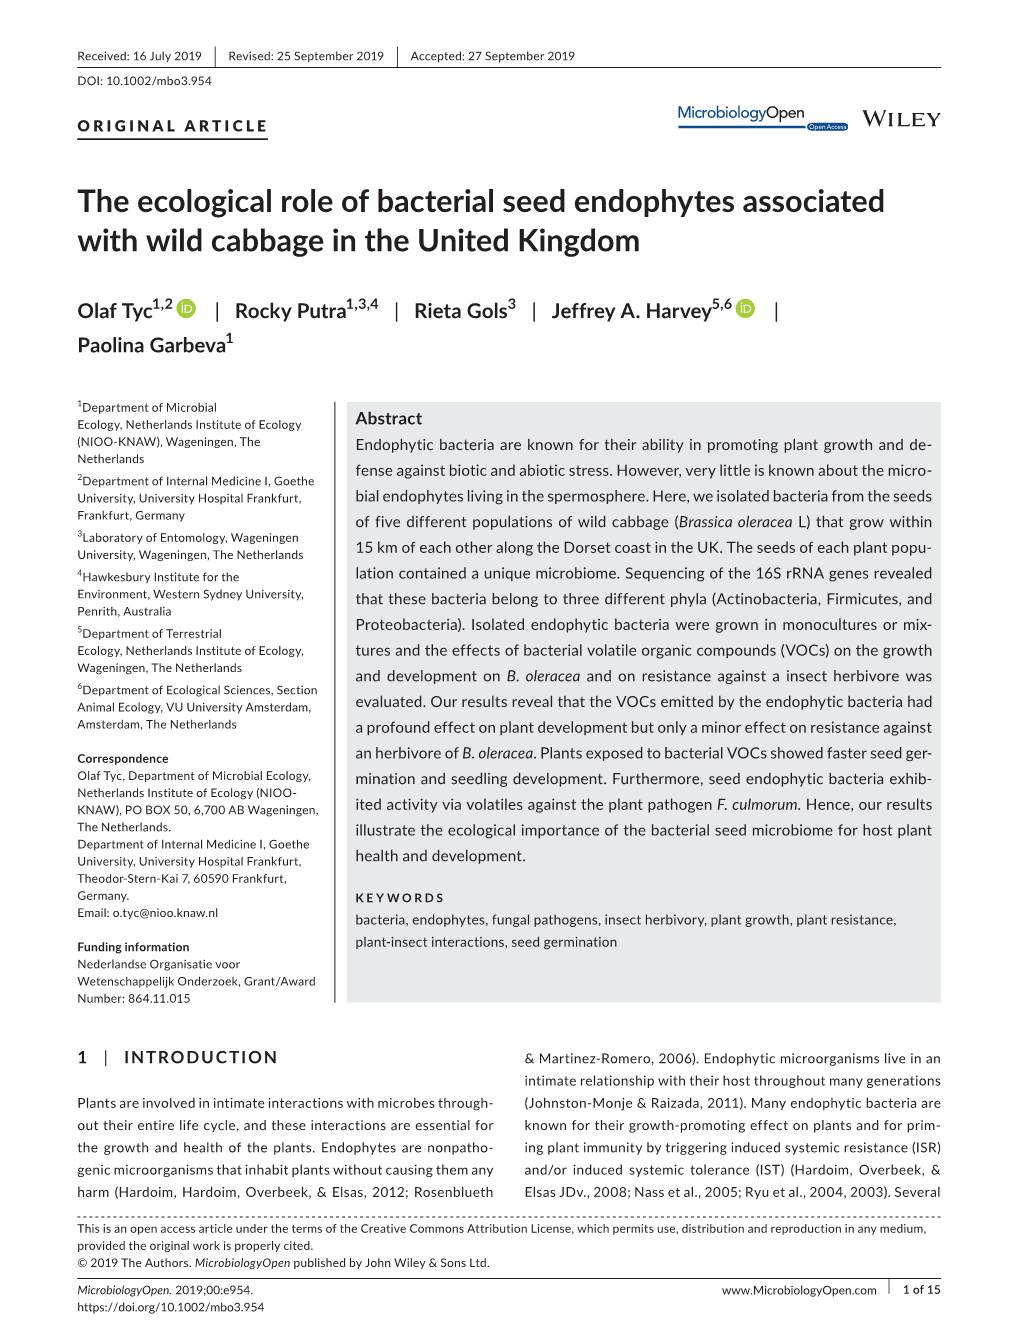 The Ecological Role of Bacterial Seed Endophytes Associated with Wild Cabbage in the United Kingdom